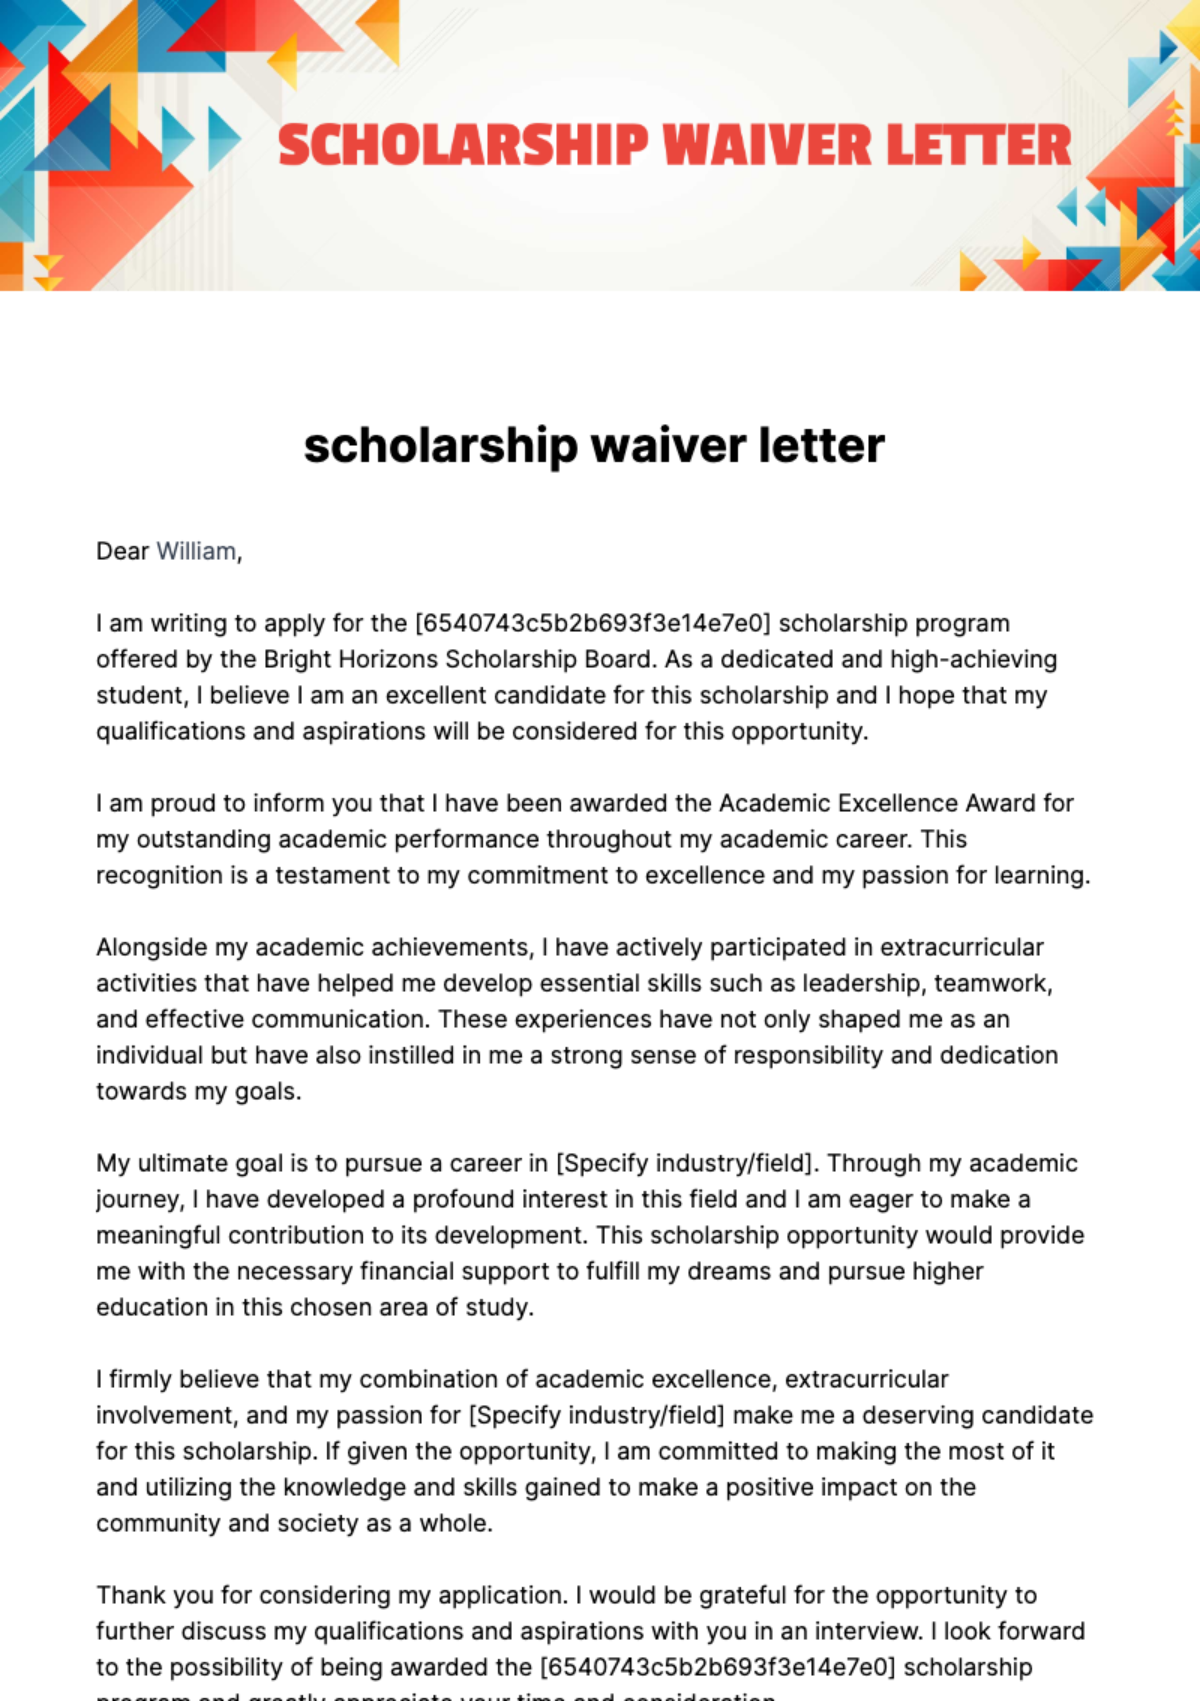 Free scholarship waiver letter Template